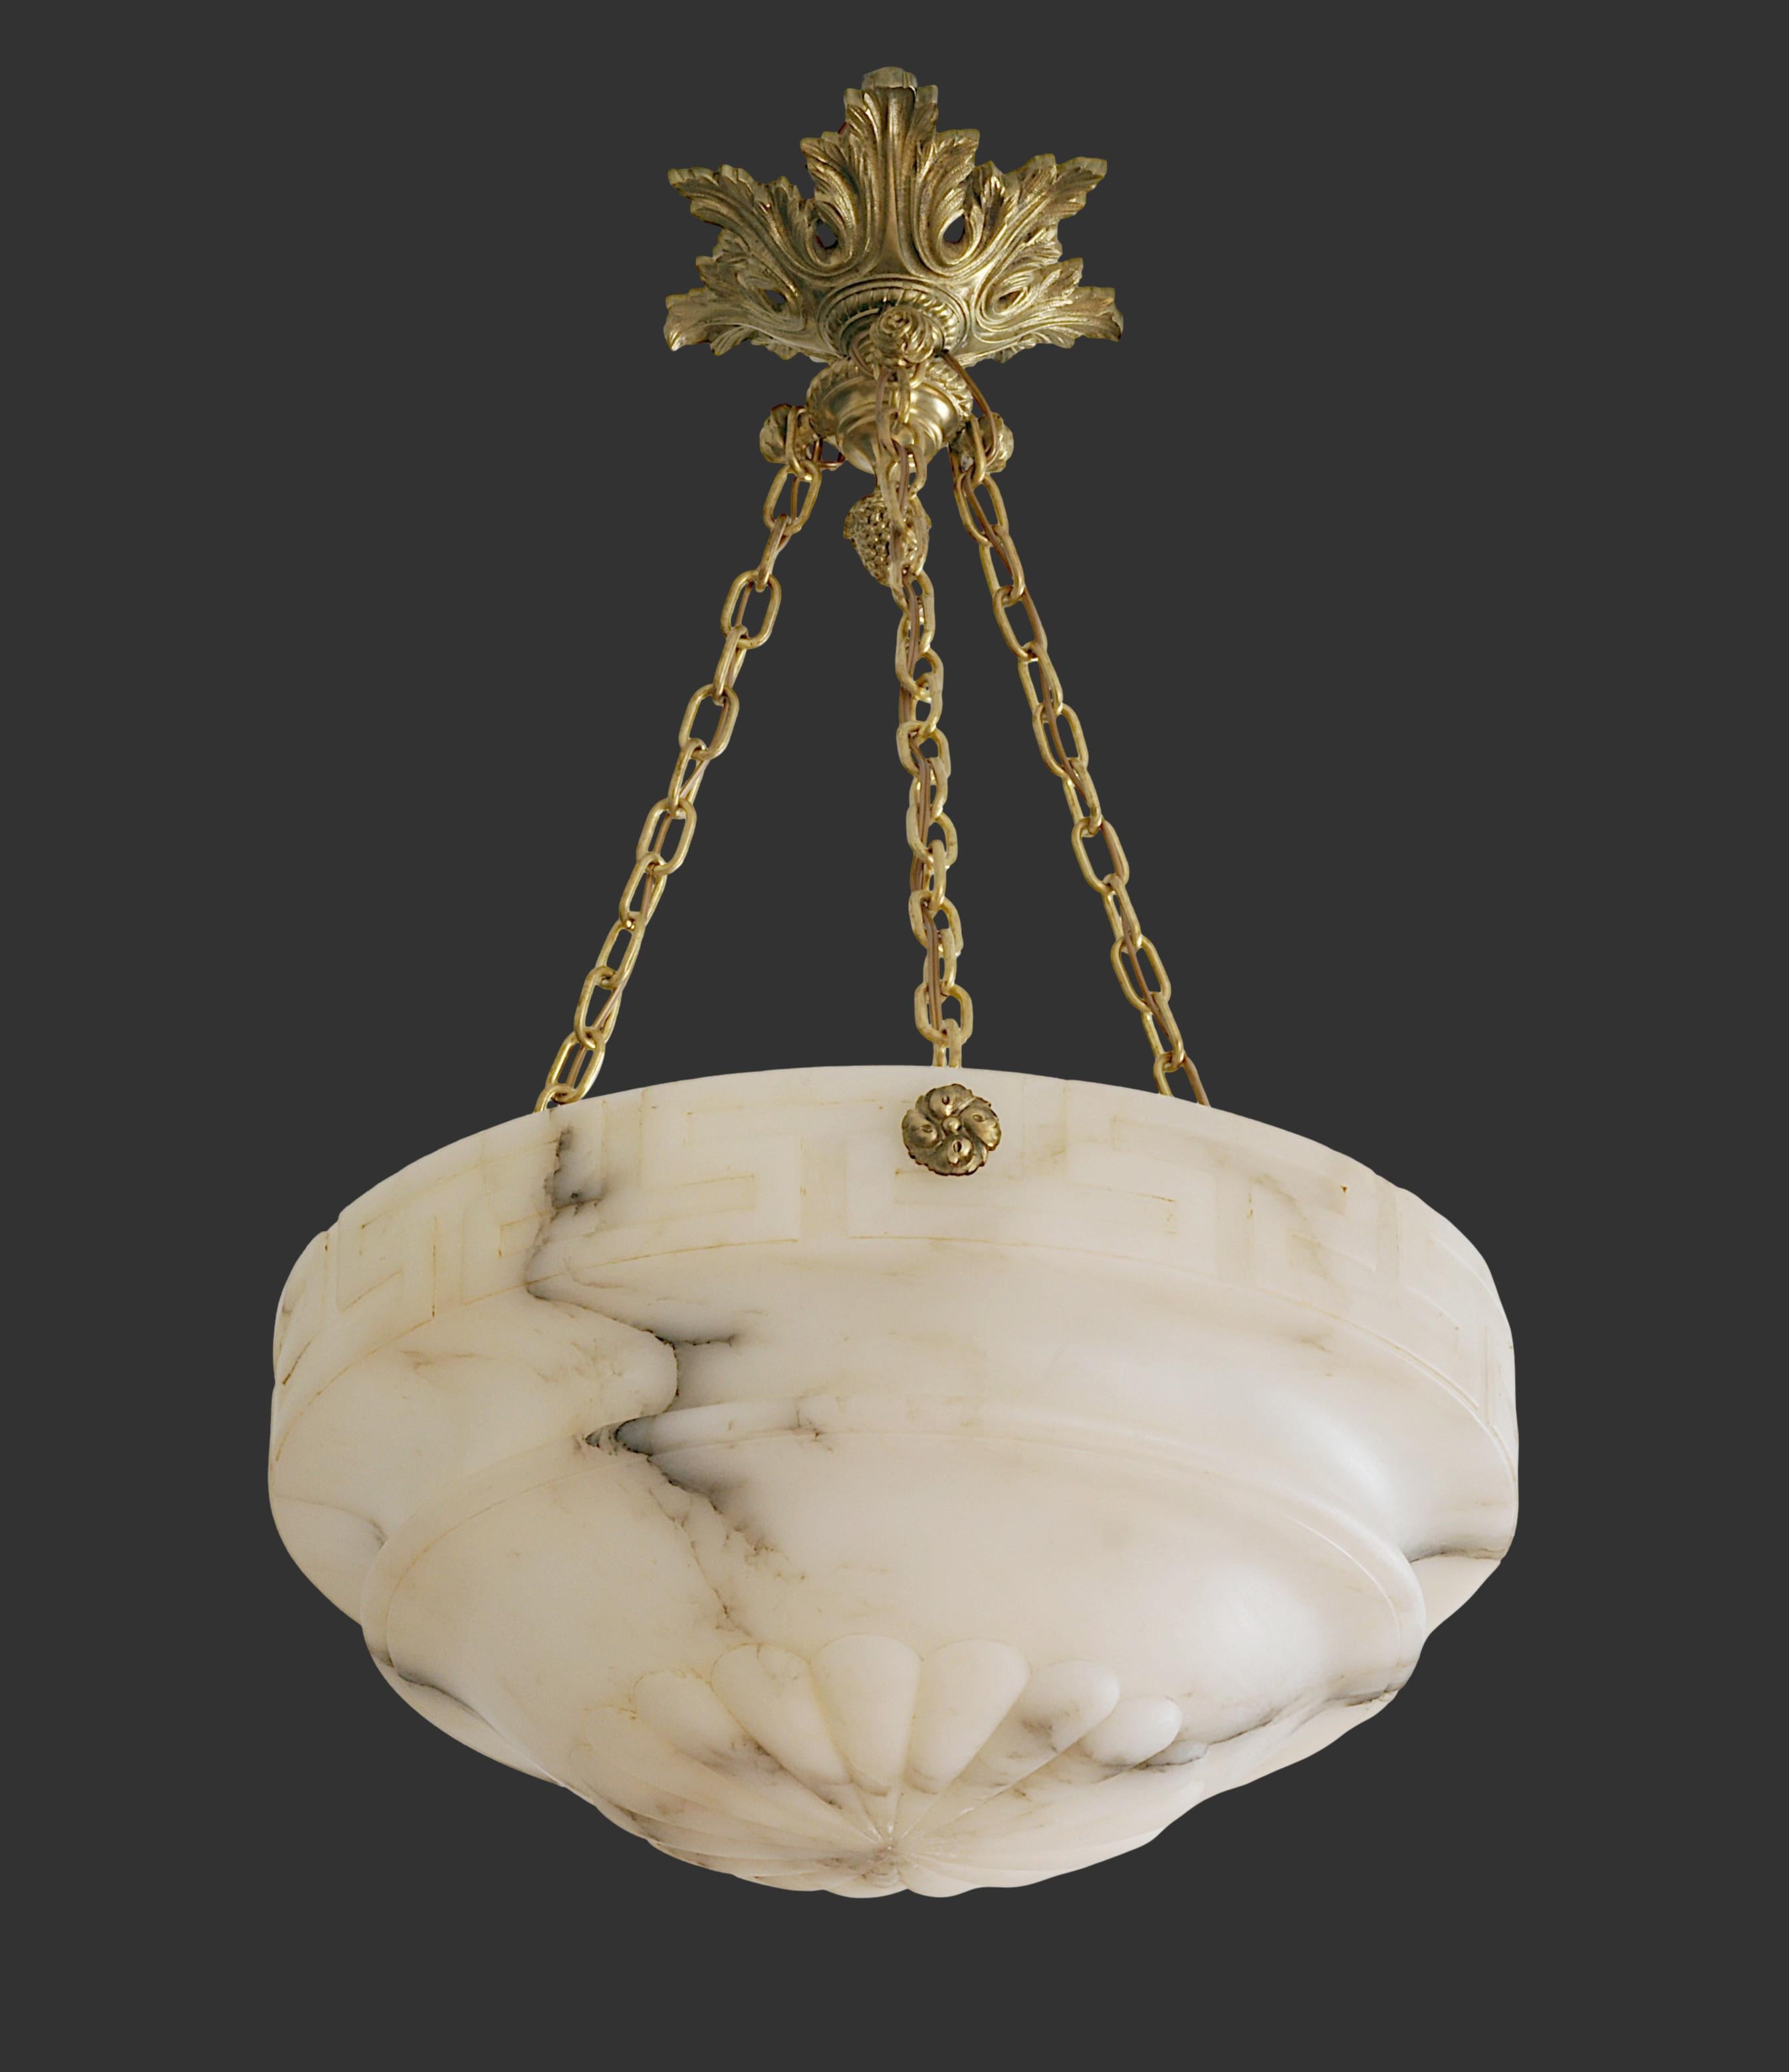 French Art Deco alabaster pendant chandelier, France, 1920s. Beautiful carved alabaster shade decorated with a central rosette in its lower part and a geometric belt in its upper part, separated by a deep circular groove. Old alabaster cannot be